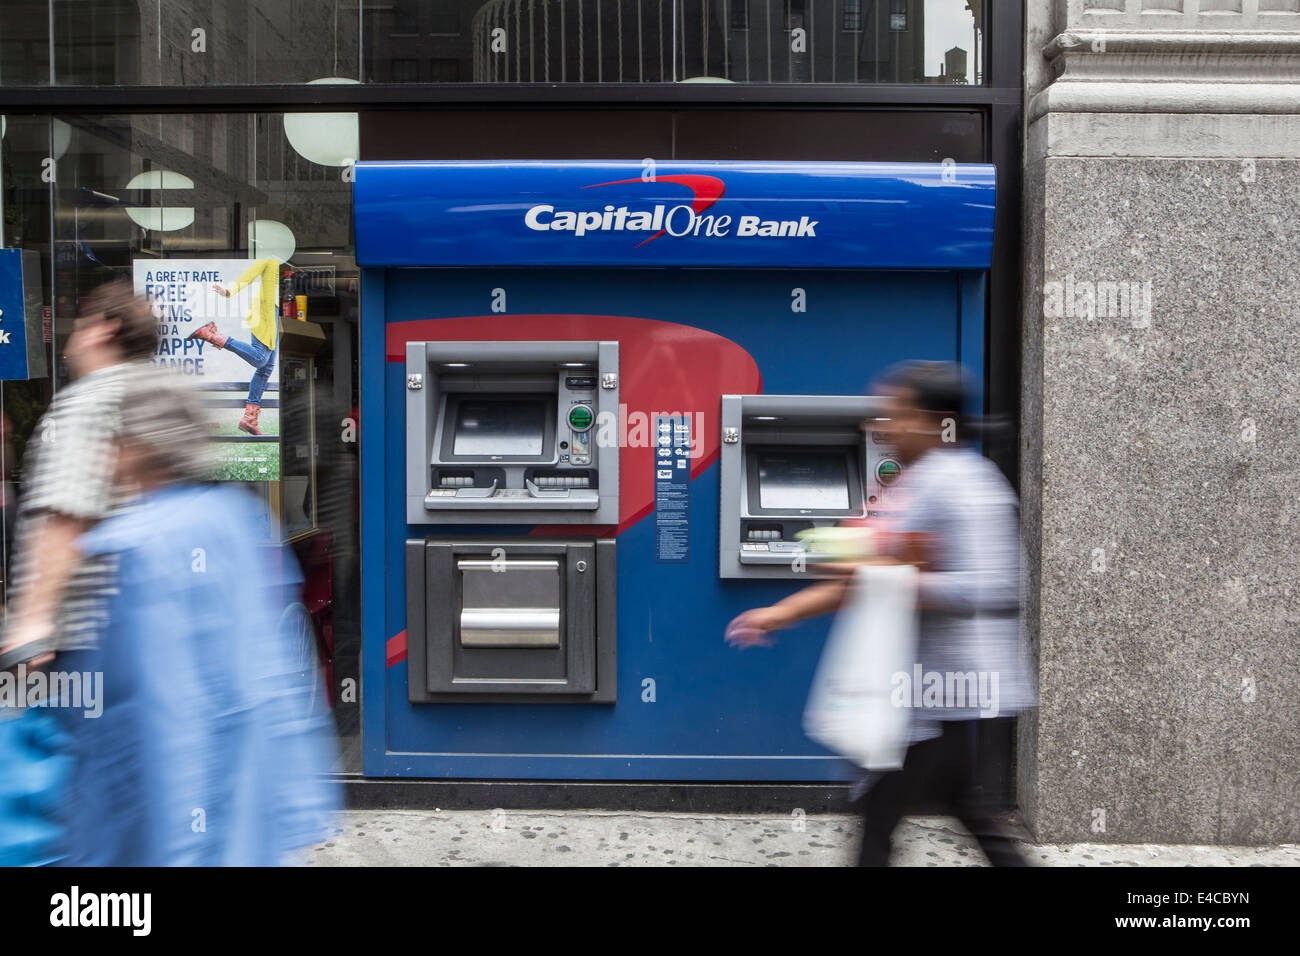 Pedestrians walk by a Capital One Bank ATM in the New York City borough of Manhattan, NY Stock Photo